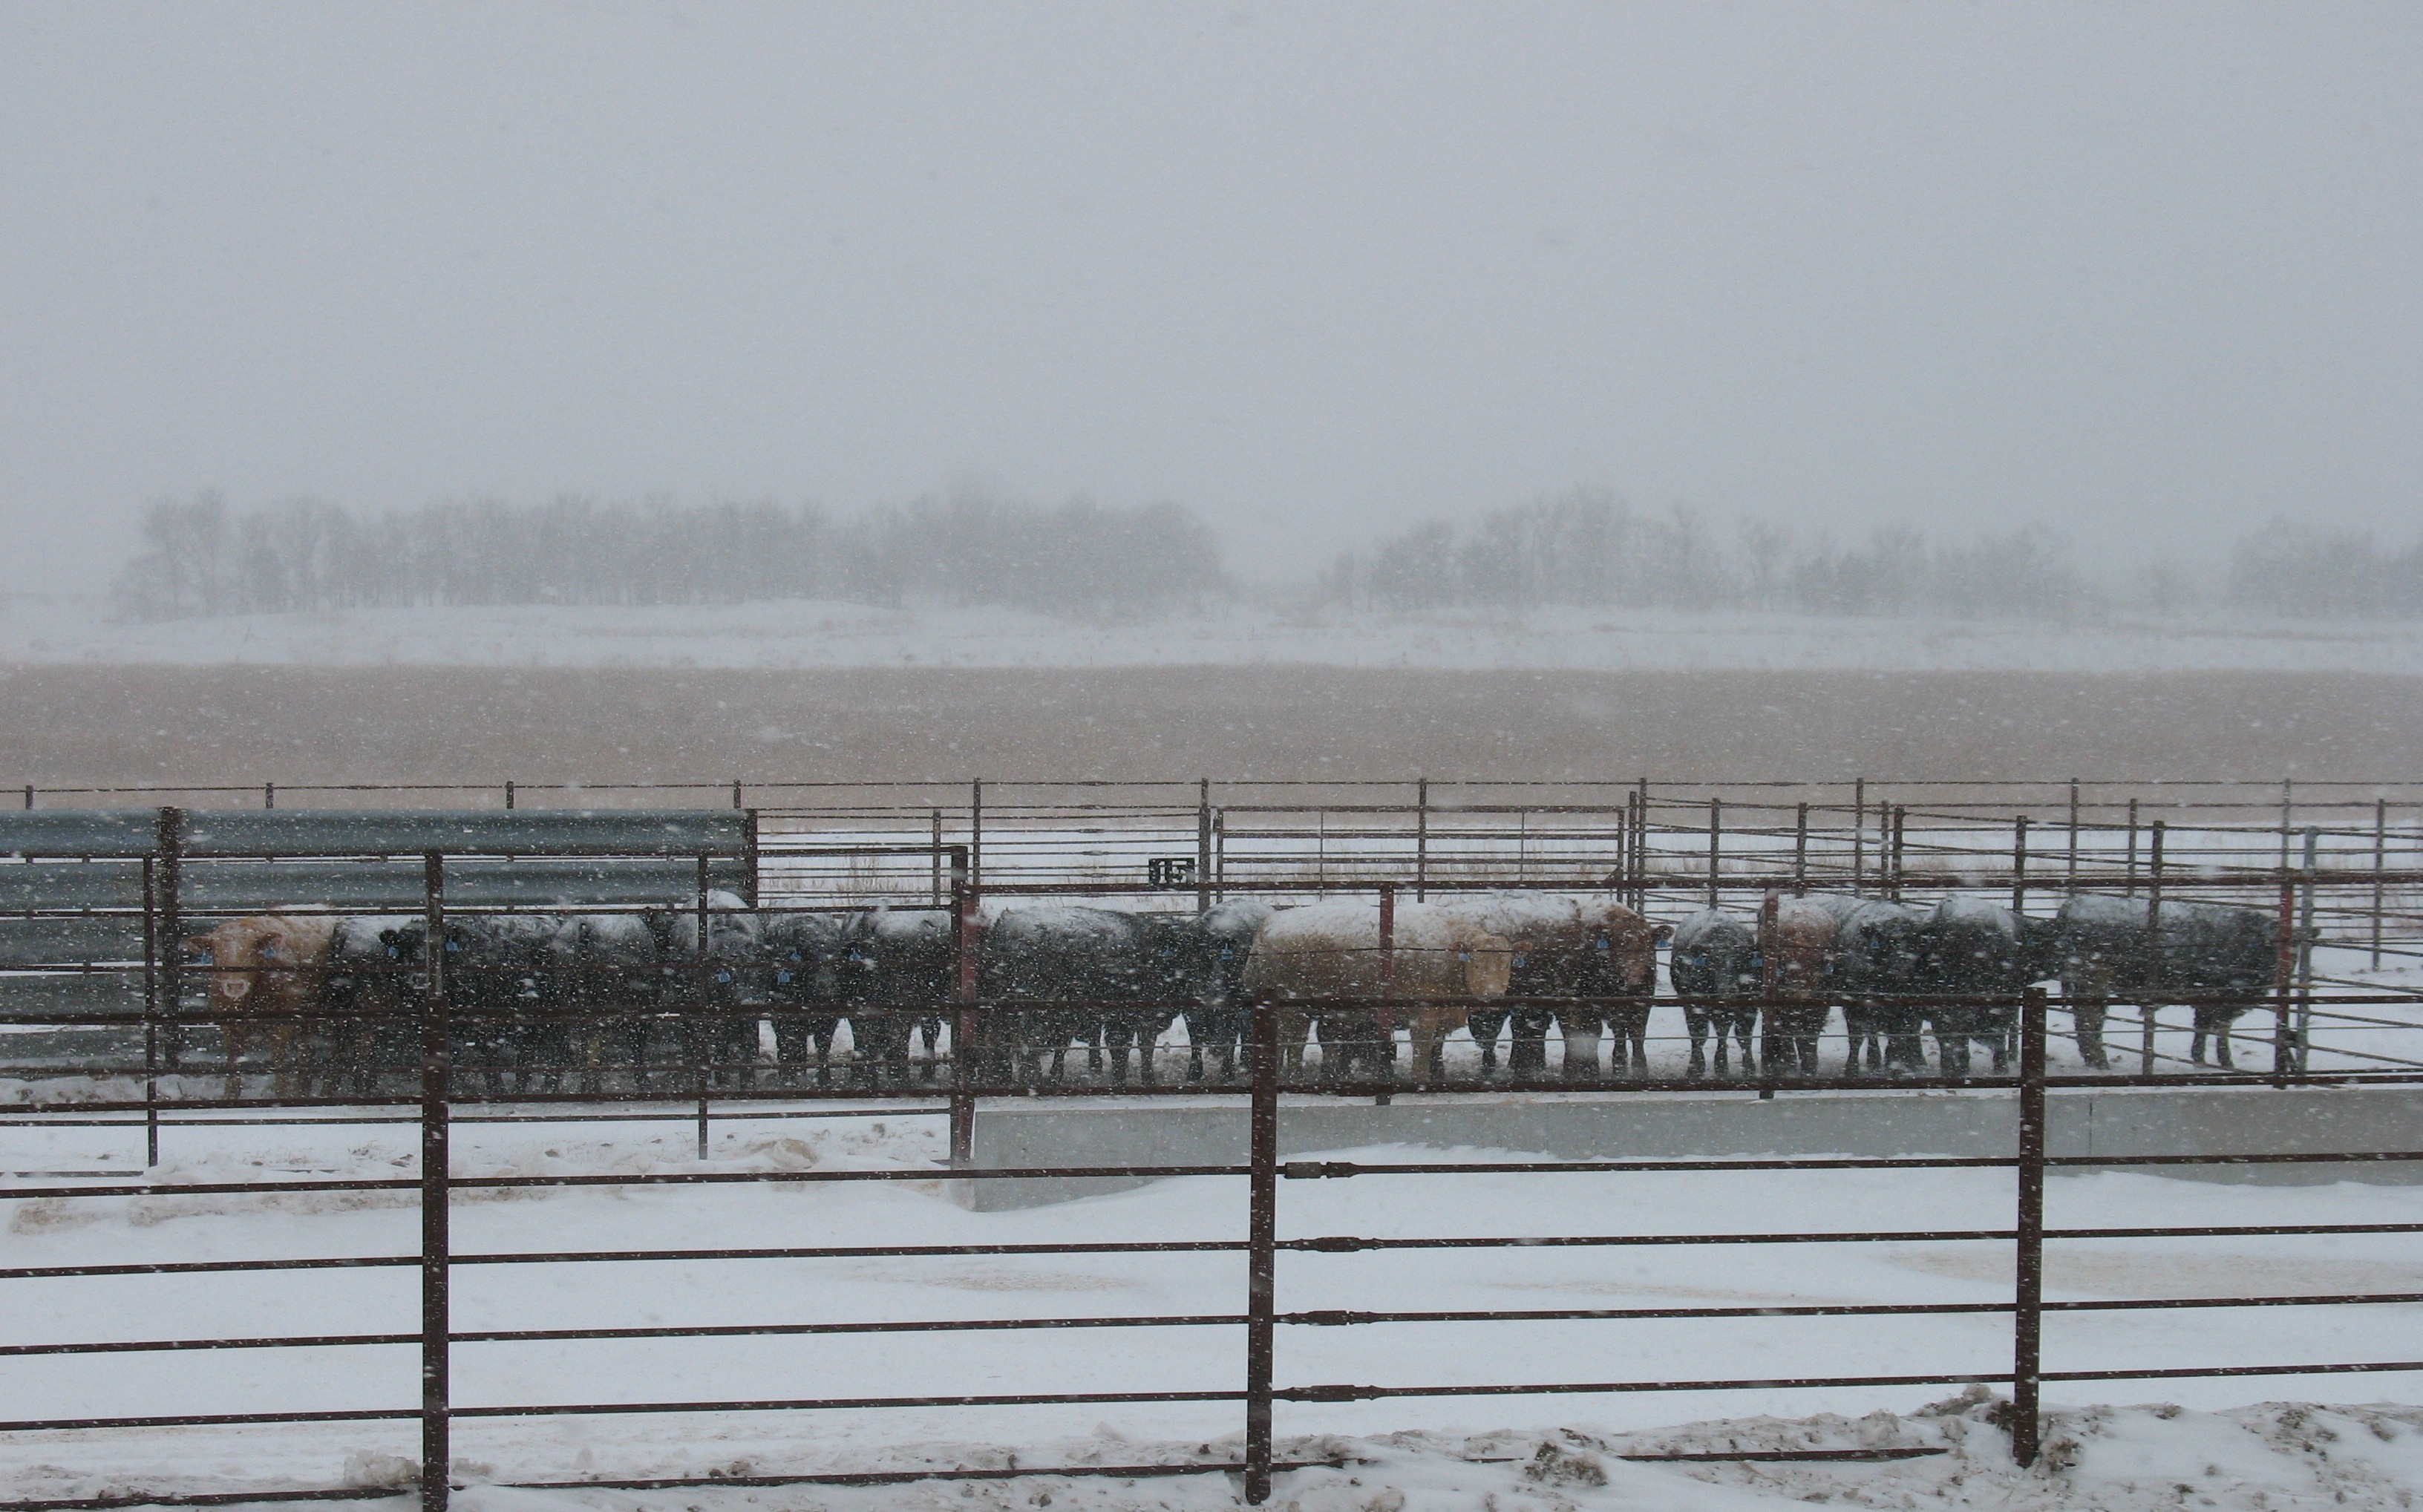 These steers are using a guardrail windbreak during a North Dakota blizzard.